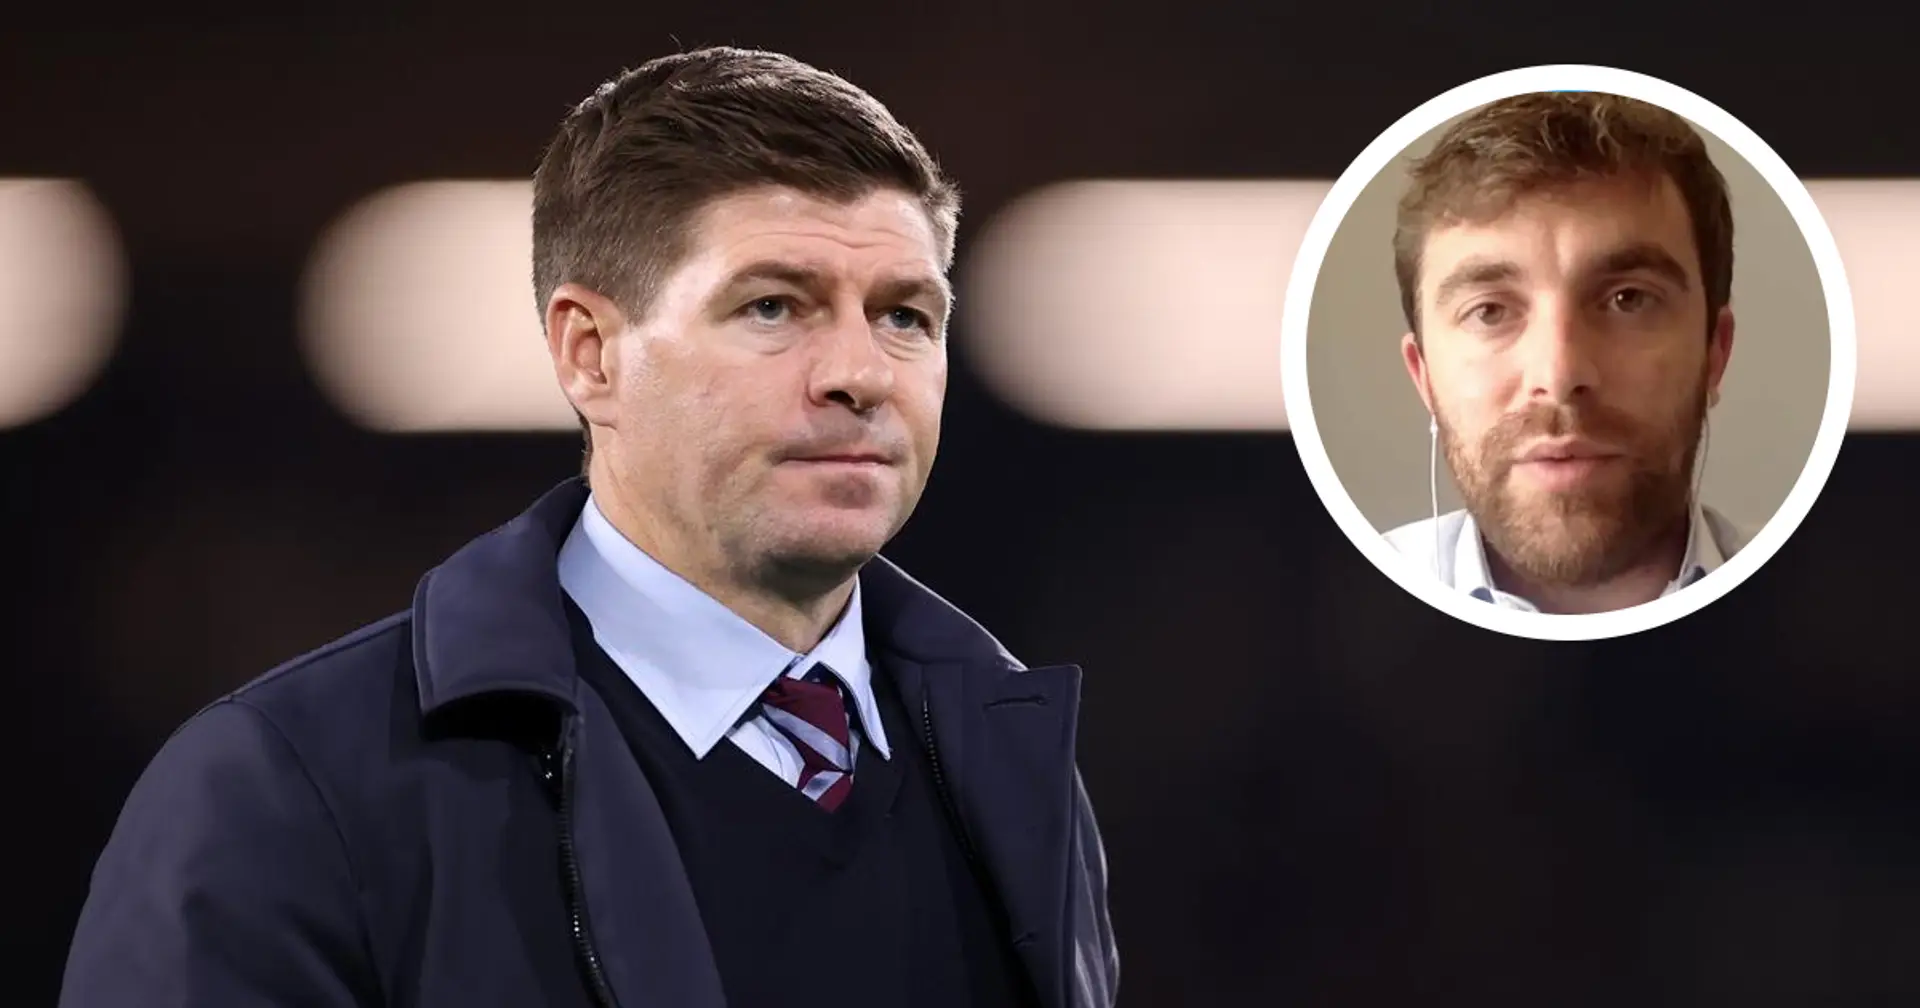 'There's been an approach': Romano confirms Gerrard might become Poland manager